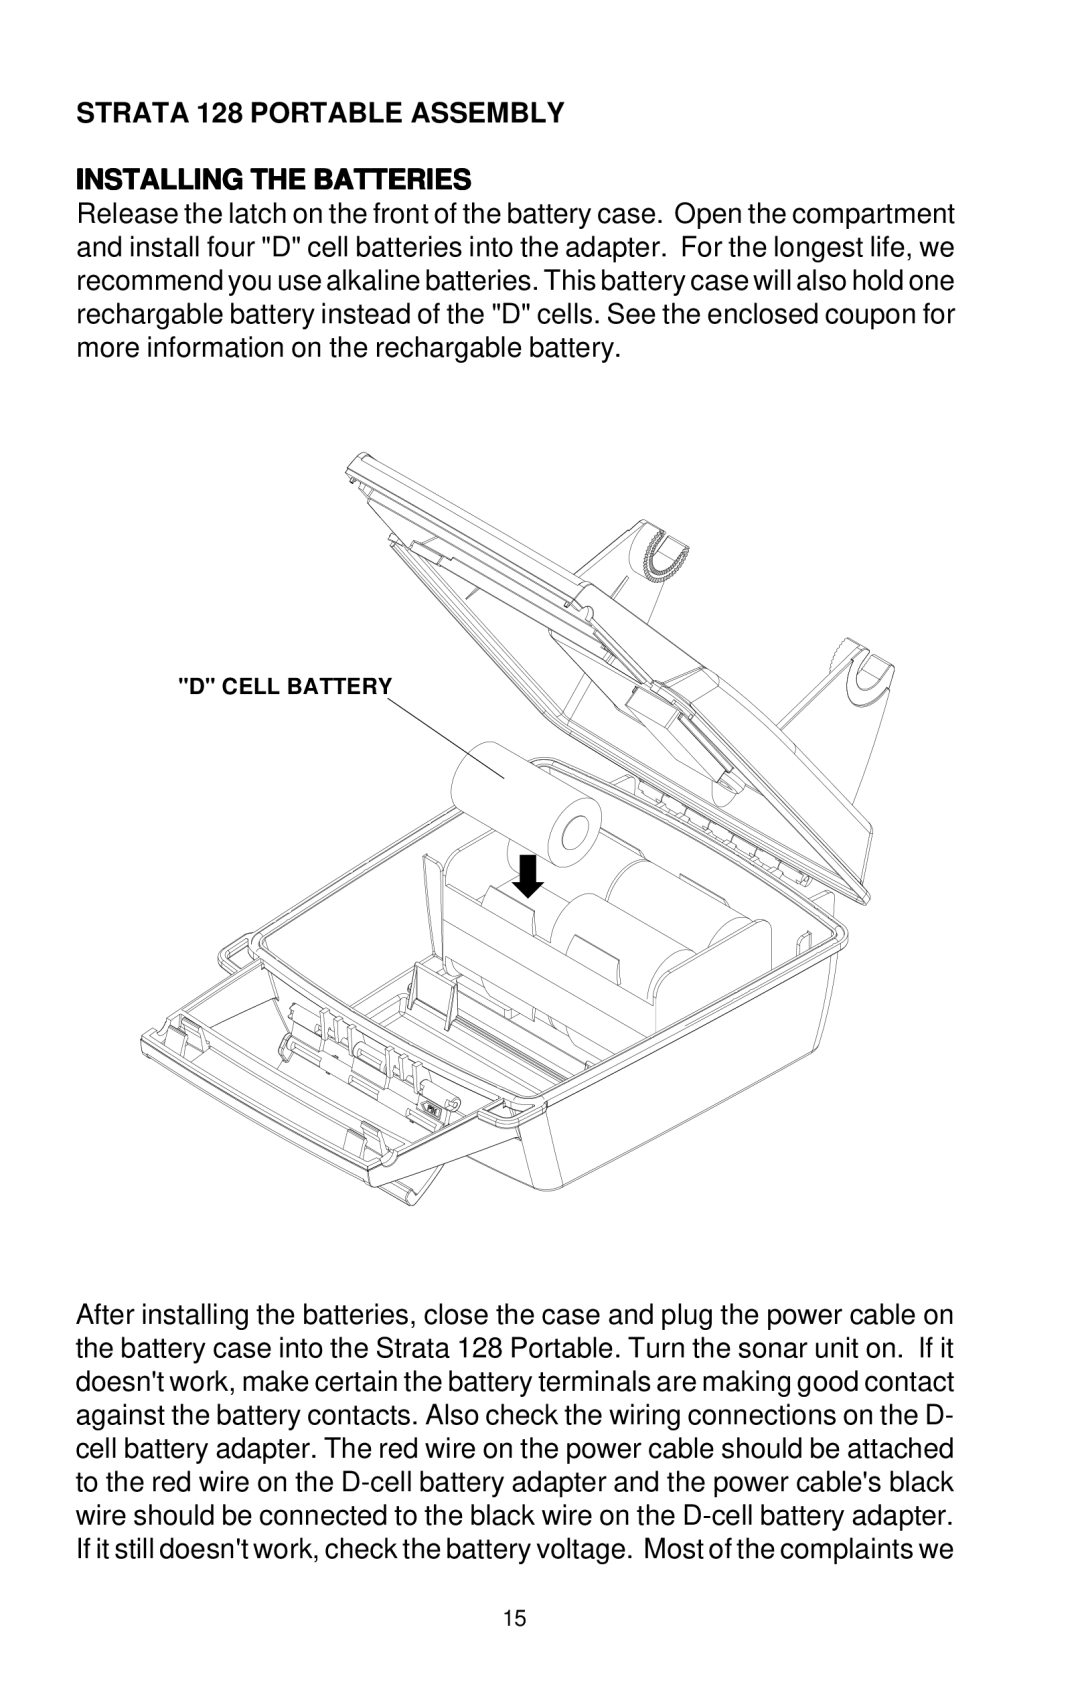 Eagle Electronics manual Strata 128 Portable Assembly Installing the Batteries 